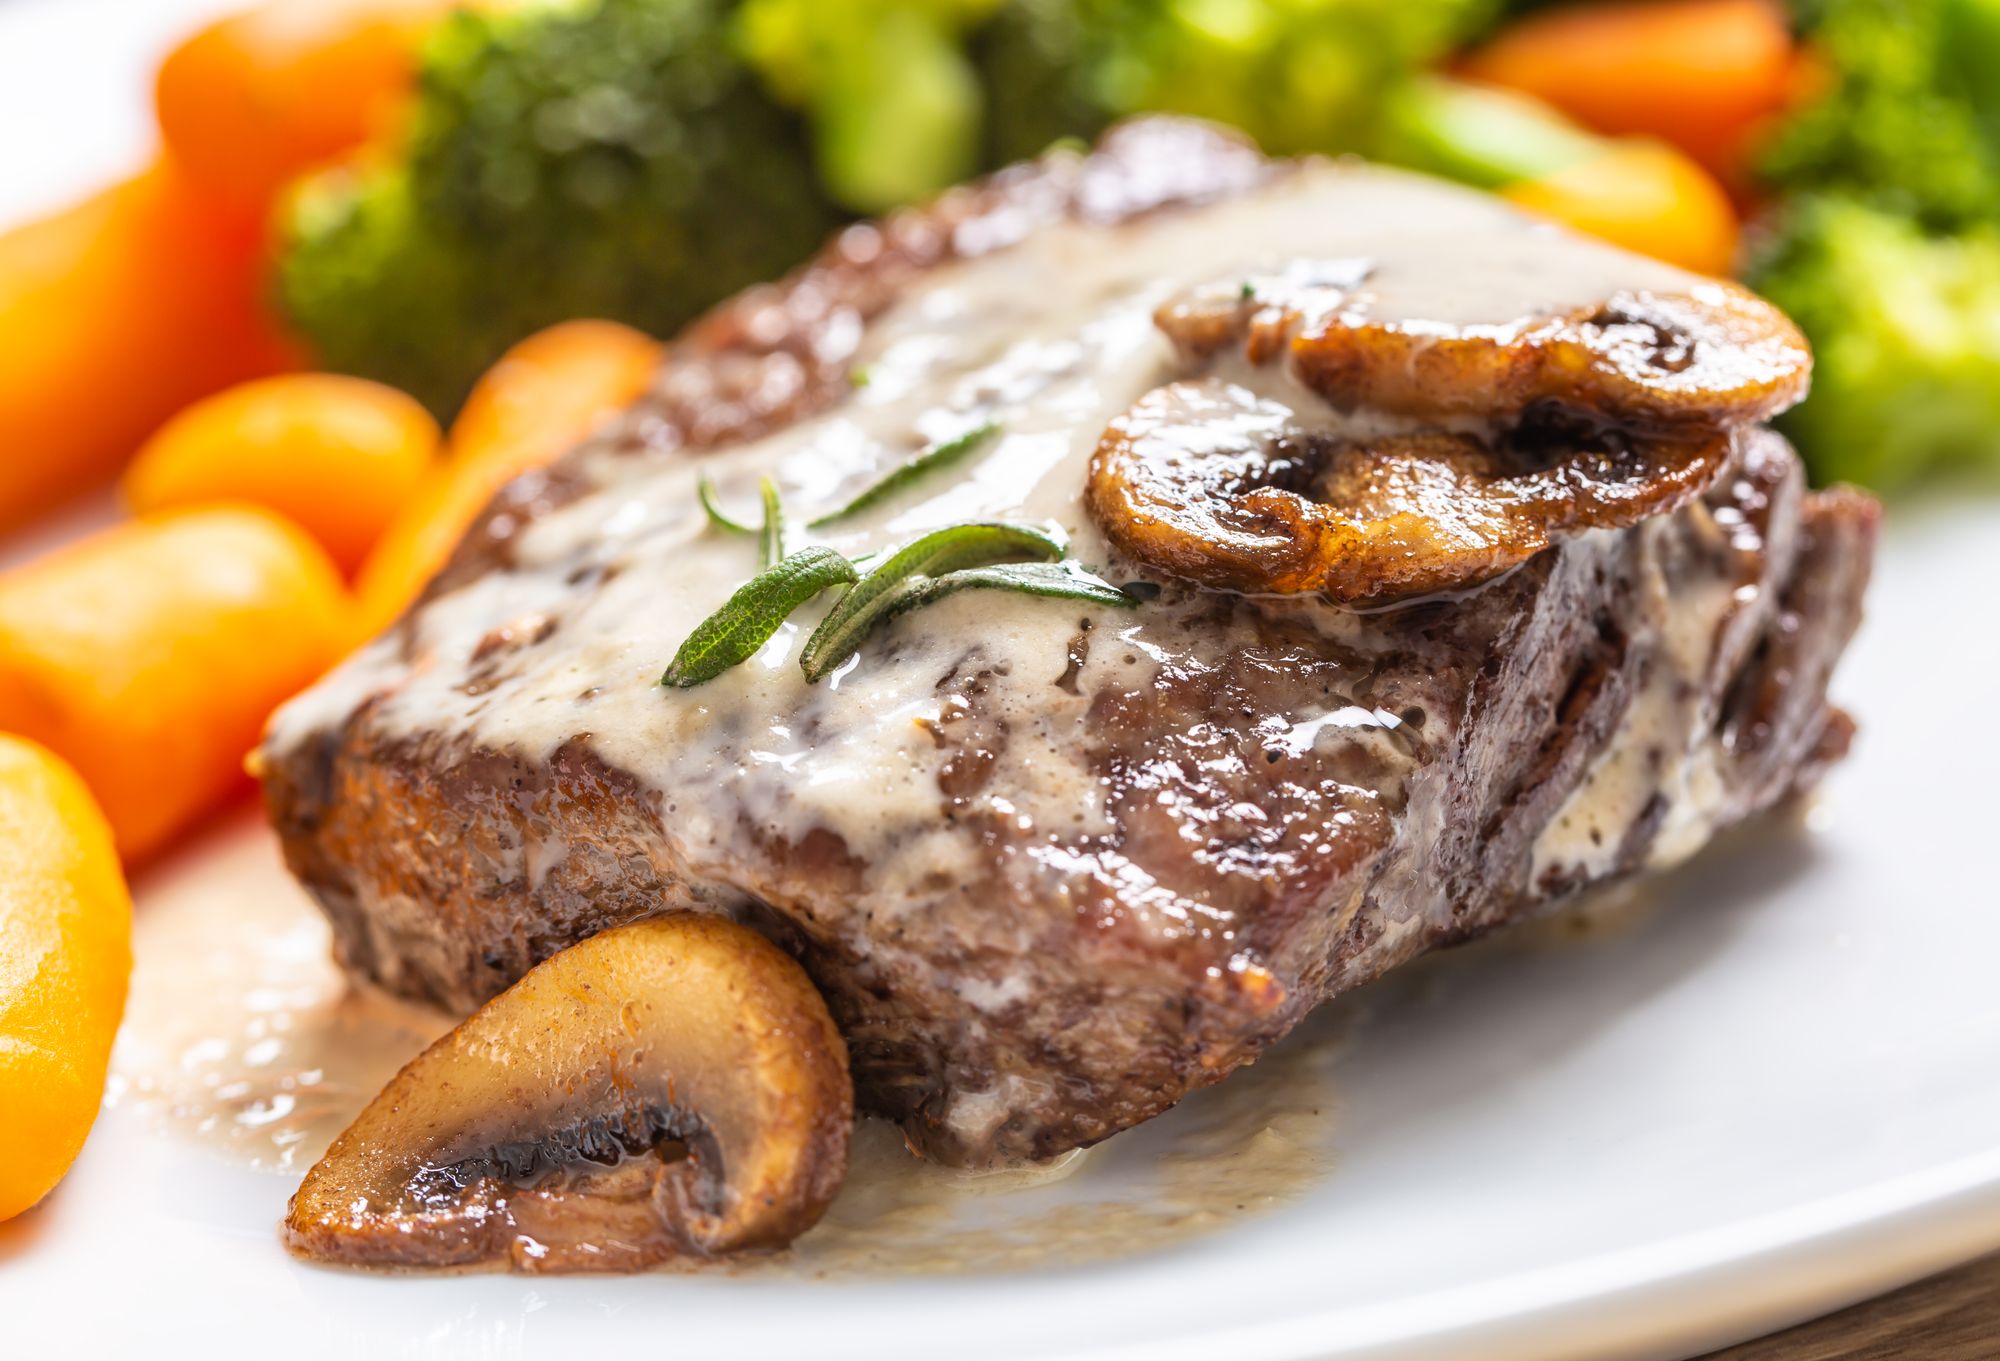 Grilled Steak with Wild Mushroom Topping